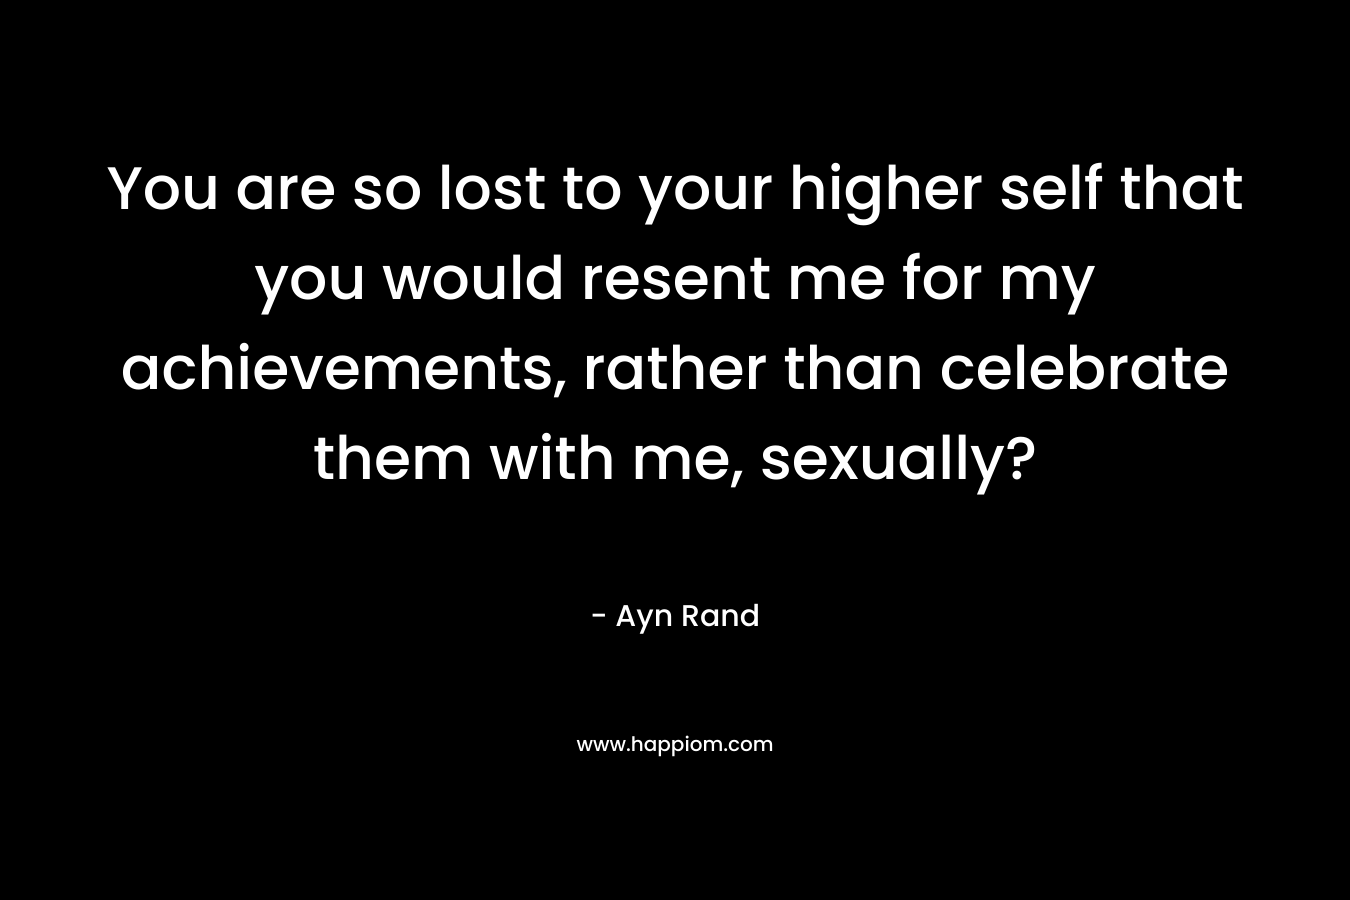 You are so lost to your higher self that you would resent me for my achievements, rather than celebrate them with me, sexually? – Ayn Rand